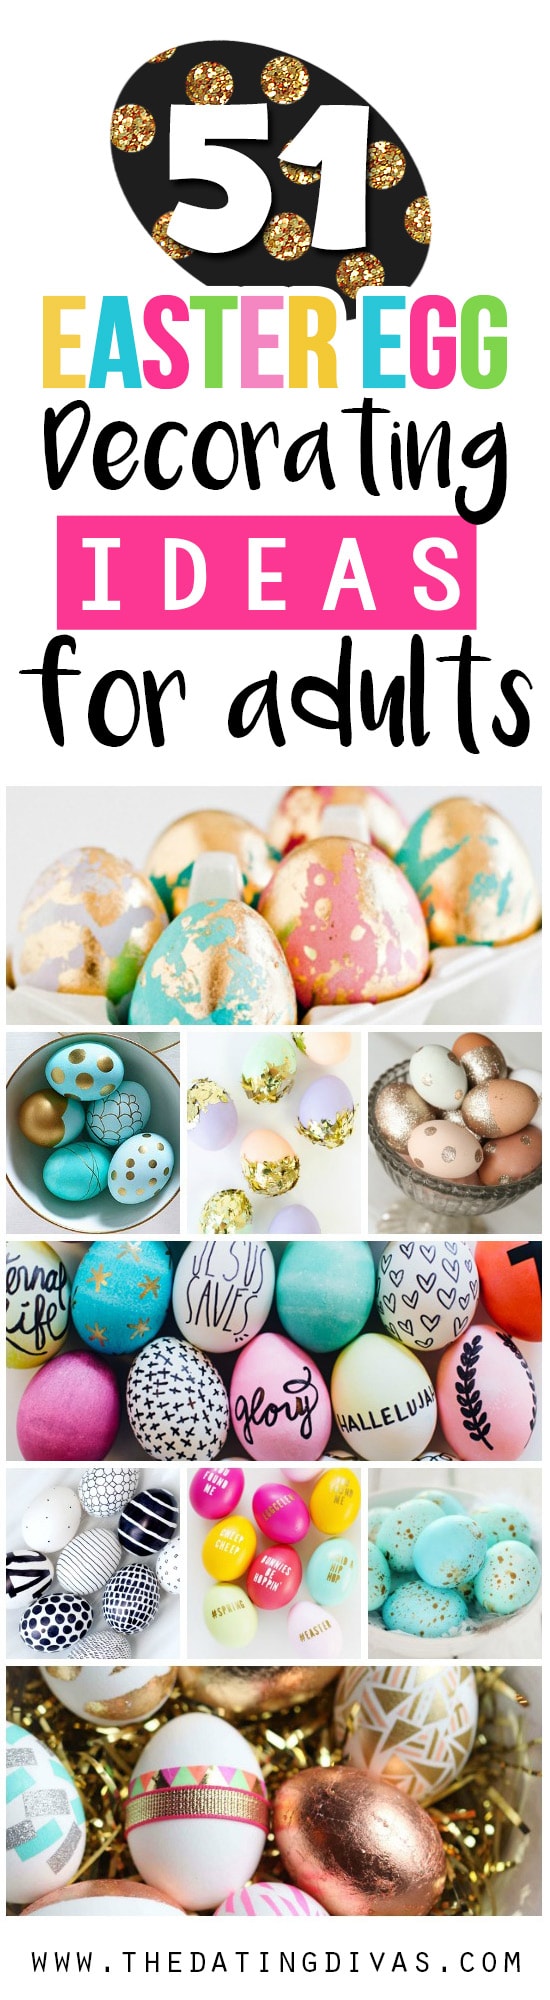 Creative Easter Egg Decorating Ideas for Adults from The Dating Divas